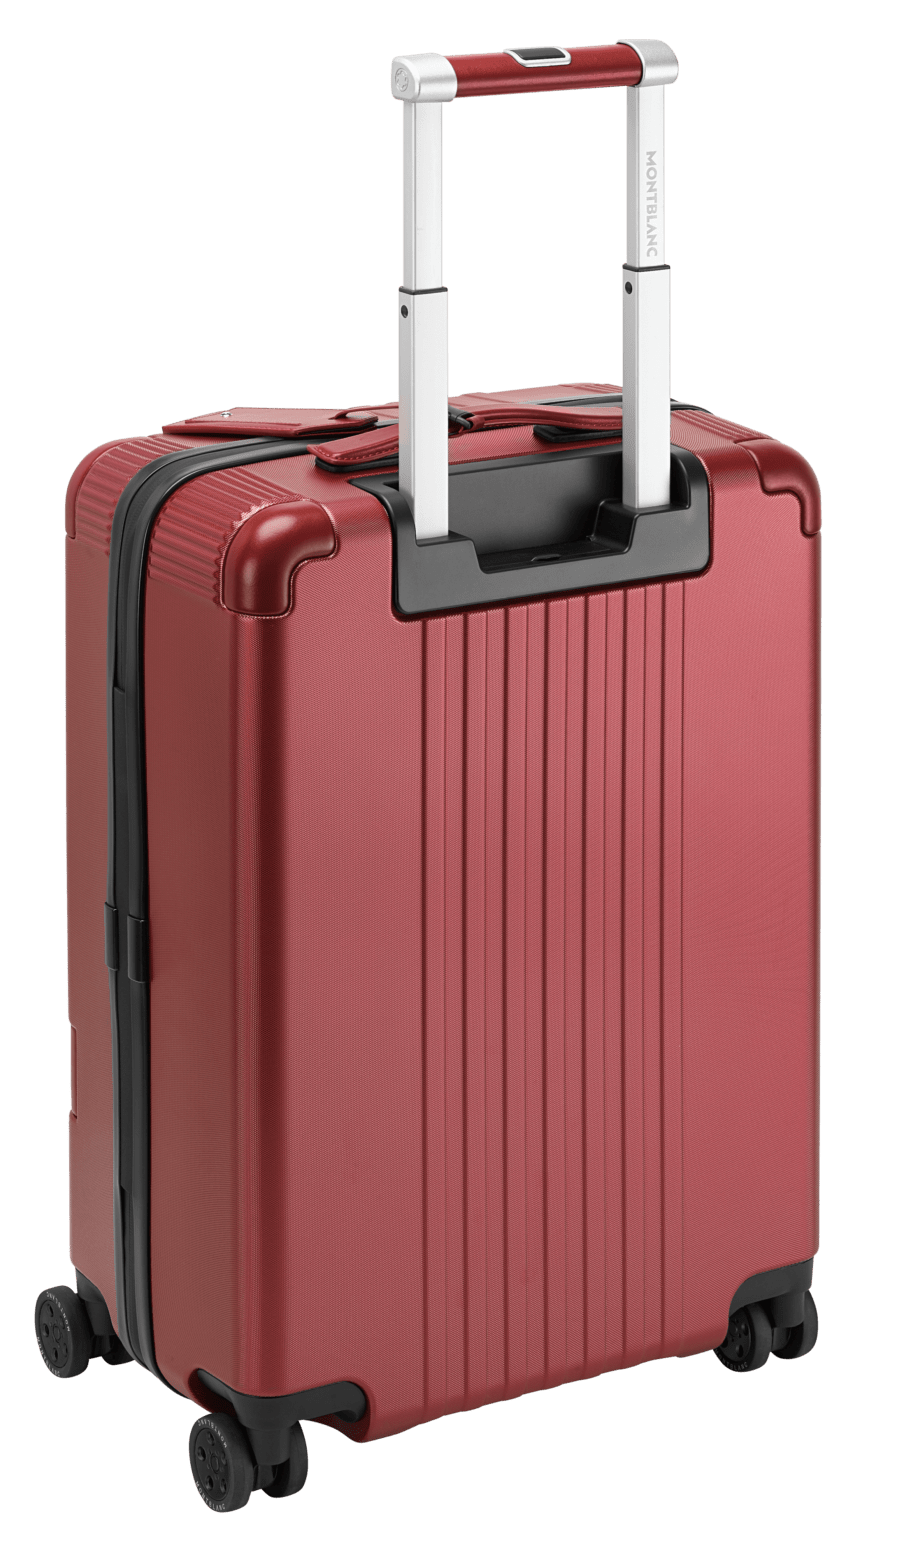 Valise cabine 4 roues #MY4810 Montblanc x (RED)